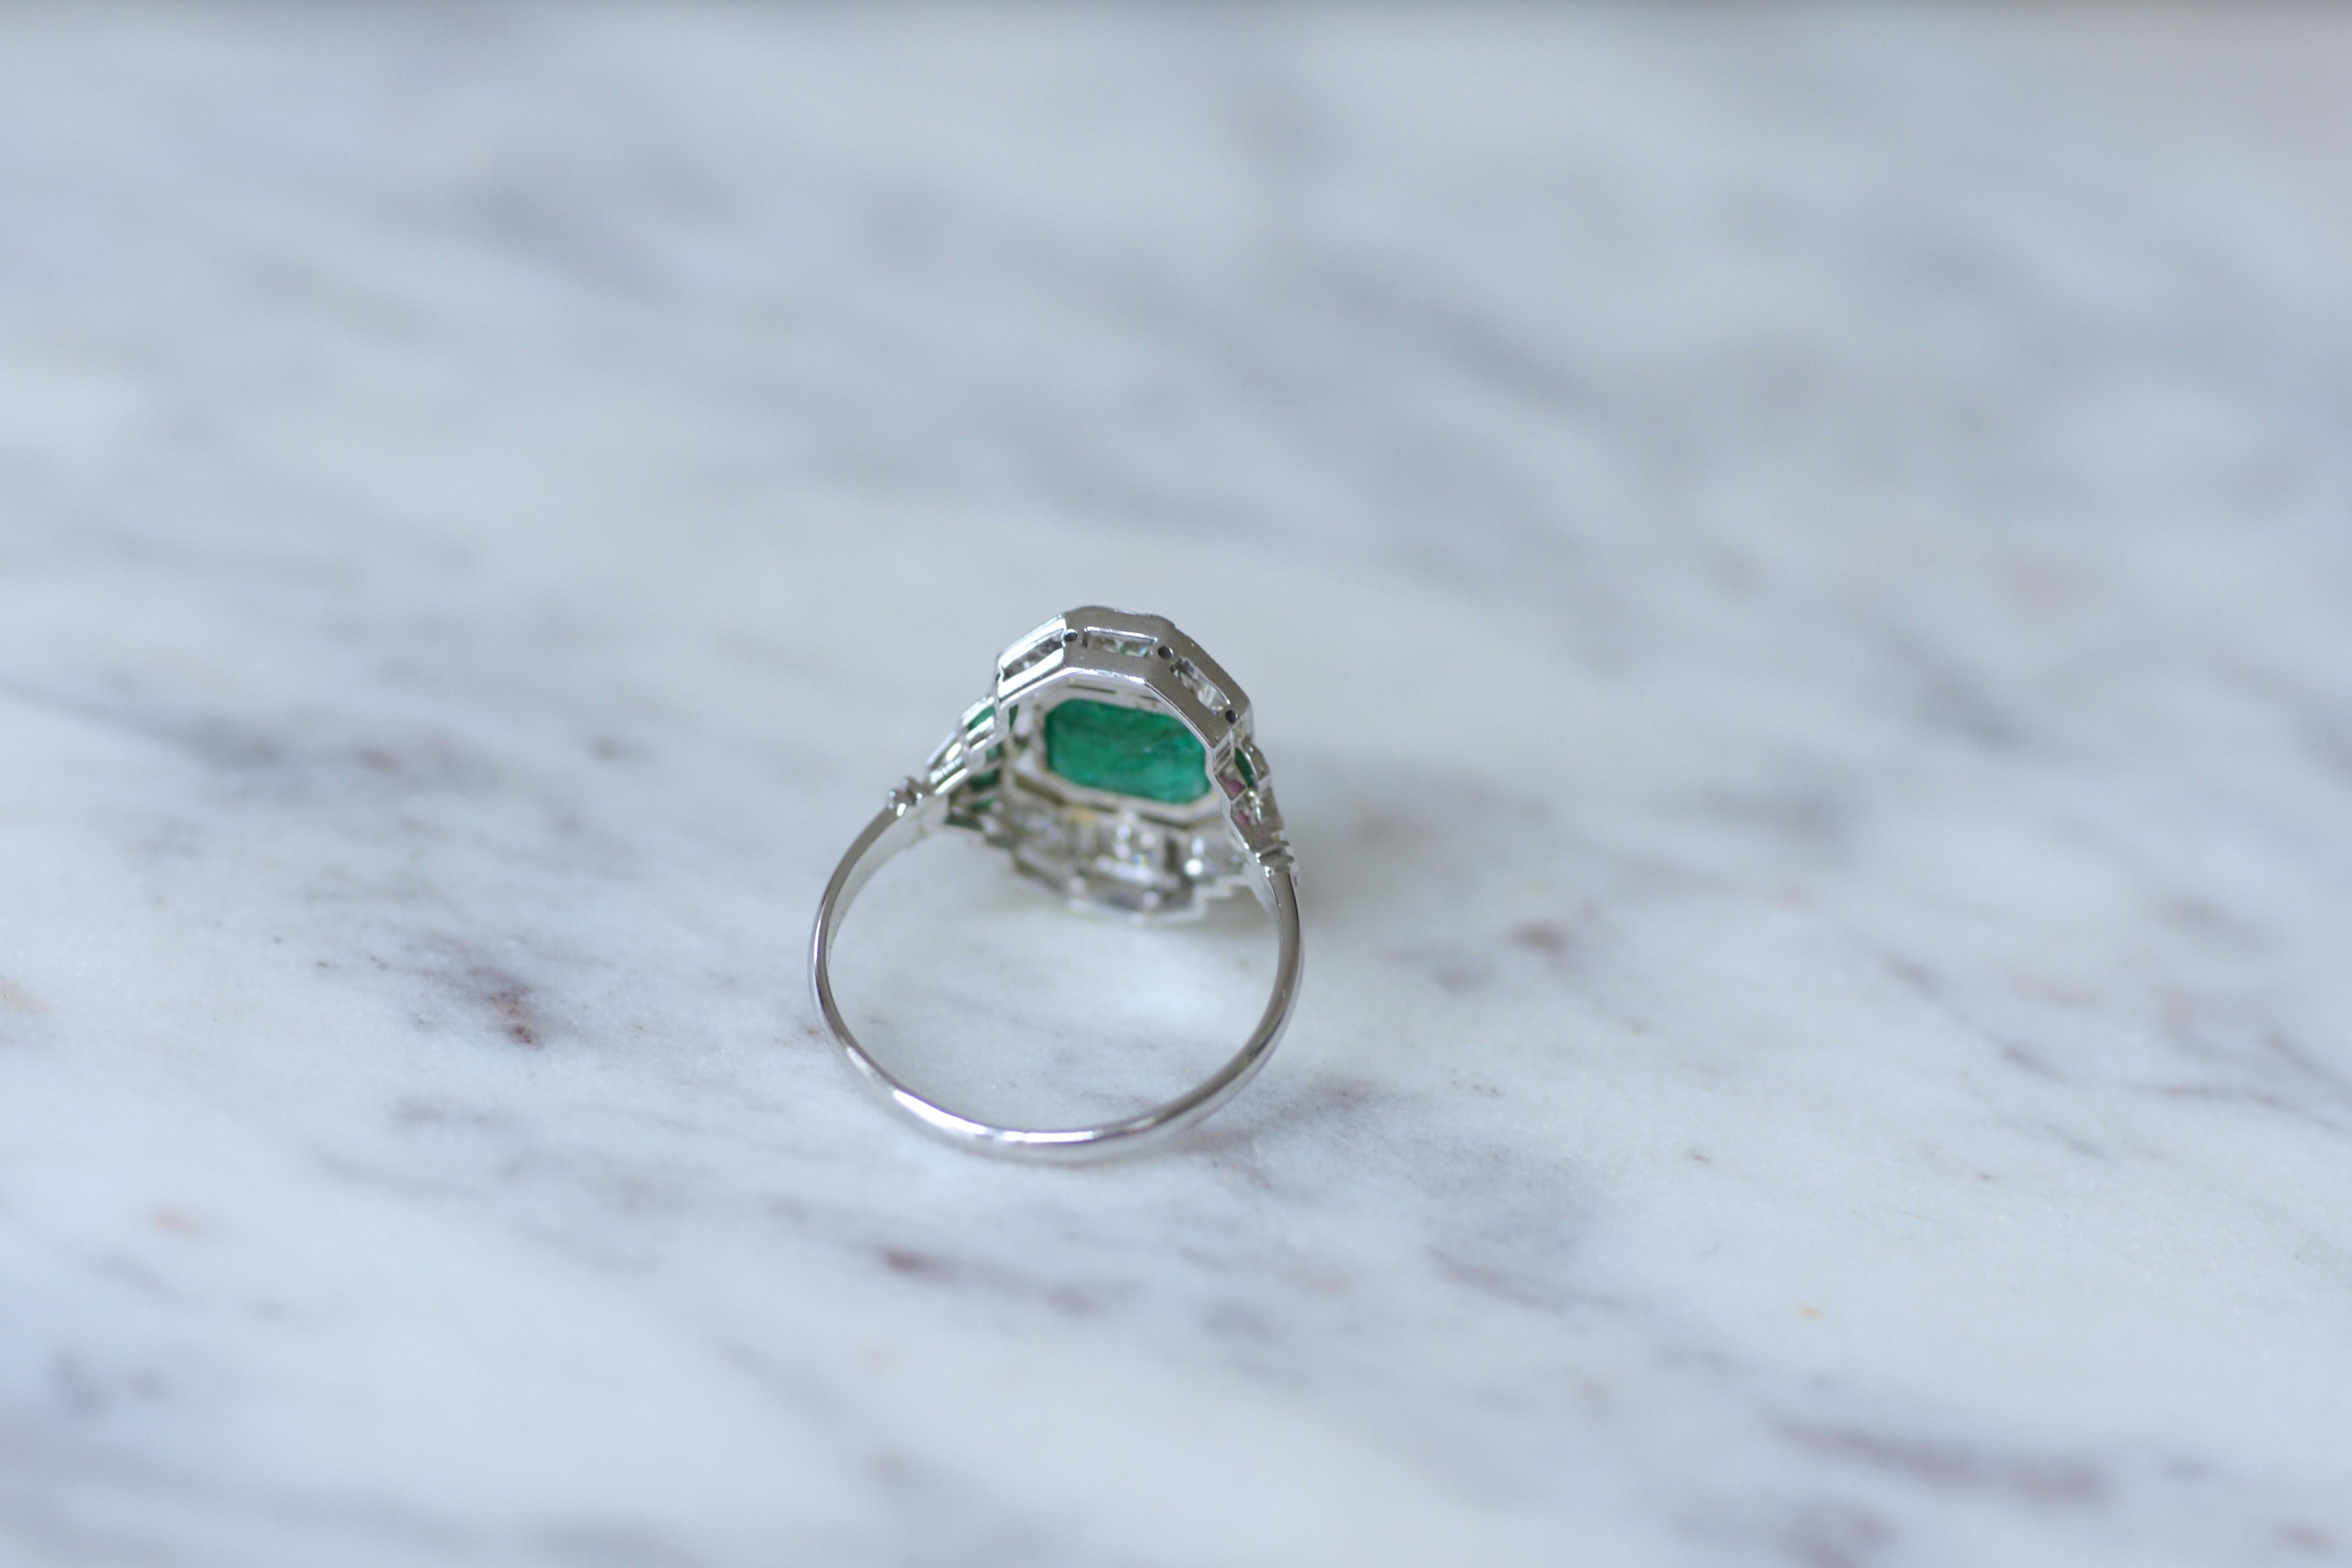 French Art Deco Certified 1, 30 Carat Emerald Ring on White Gold with Diamonds For Sale 2